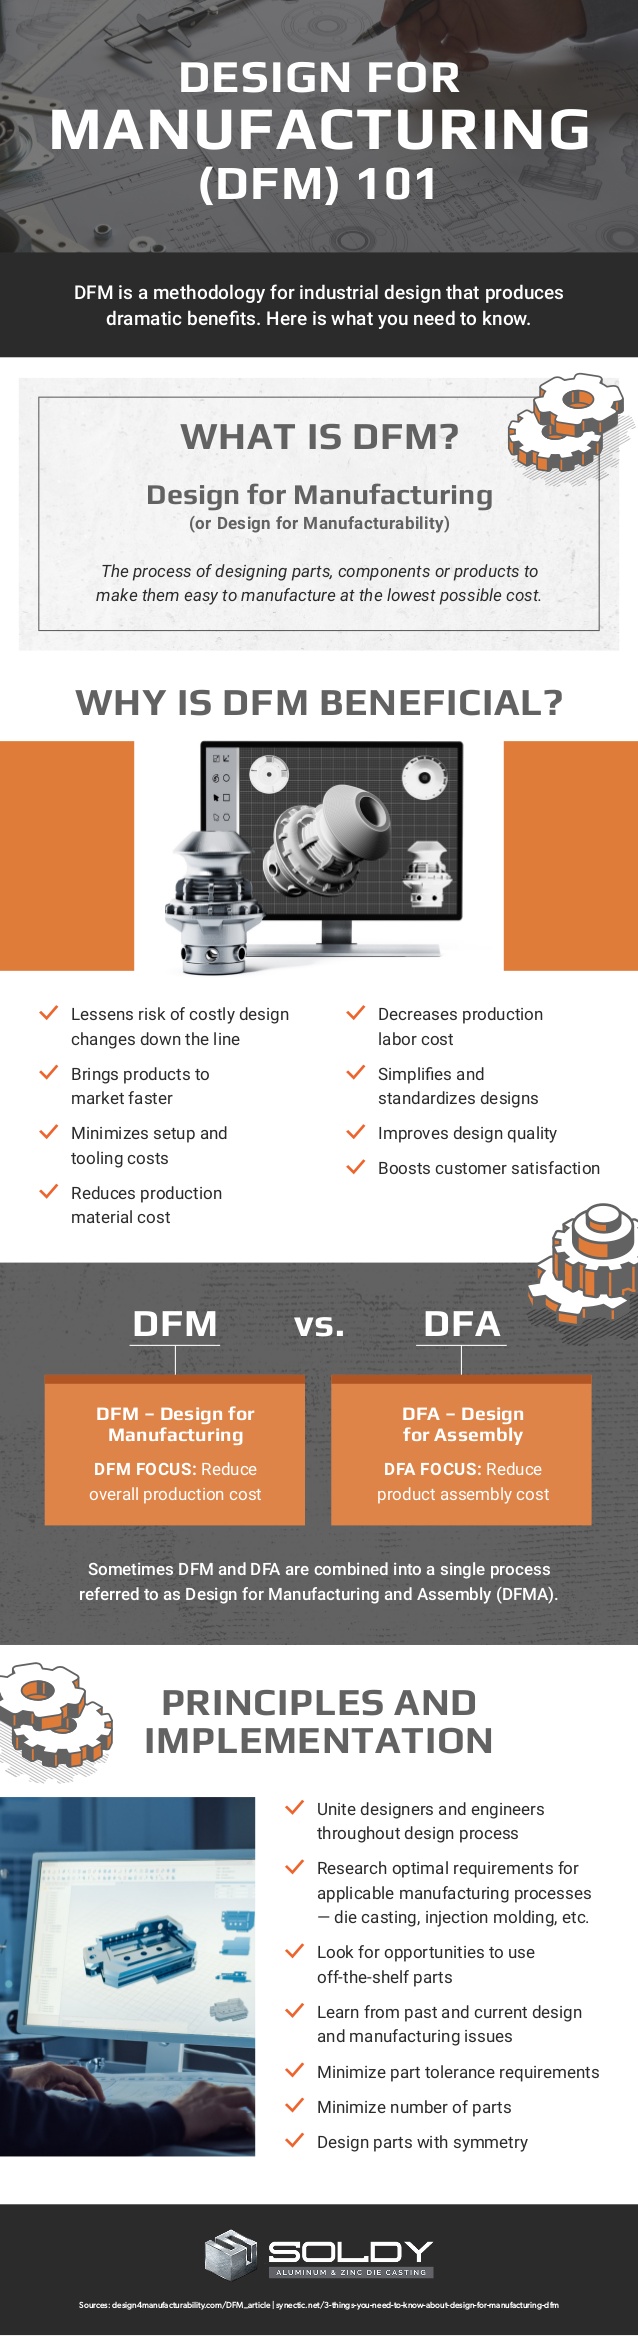 Design For Manufacturing infographic